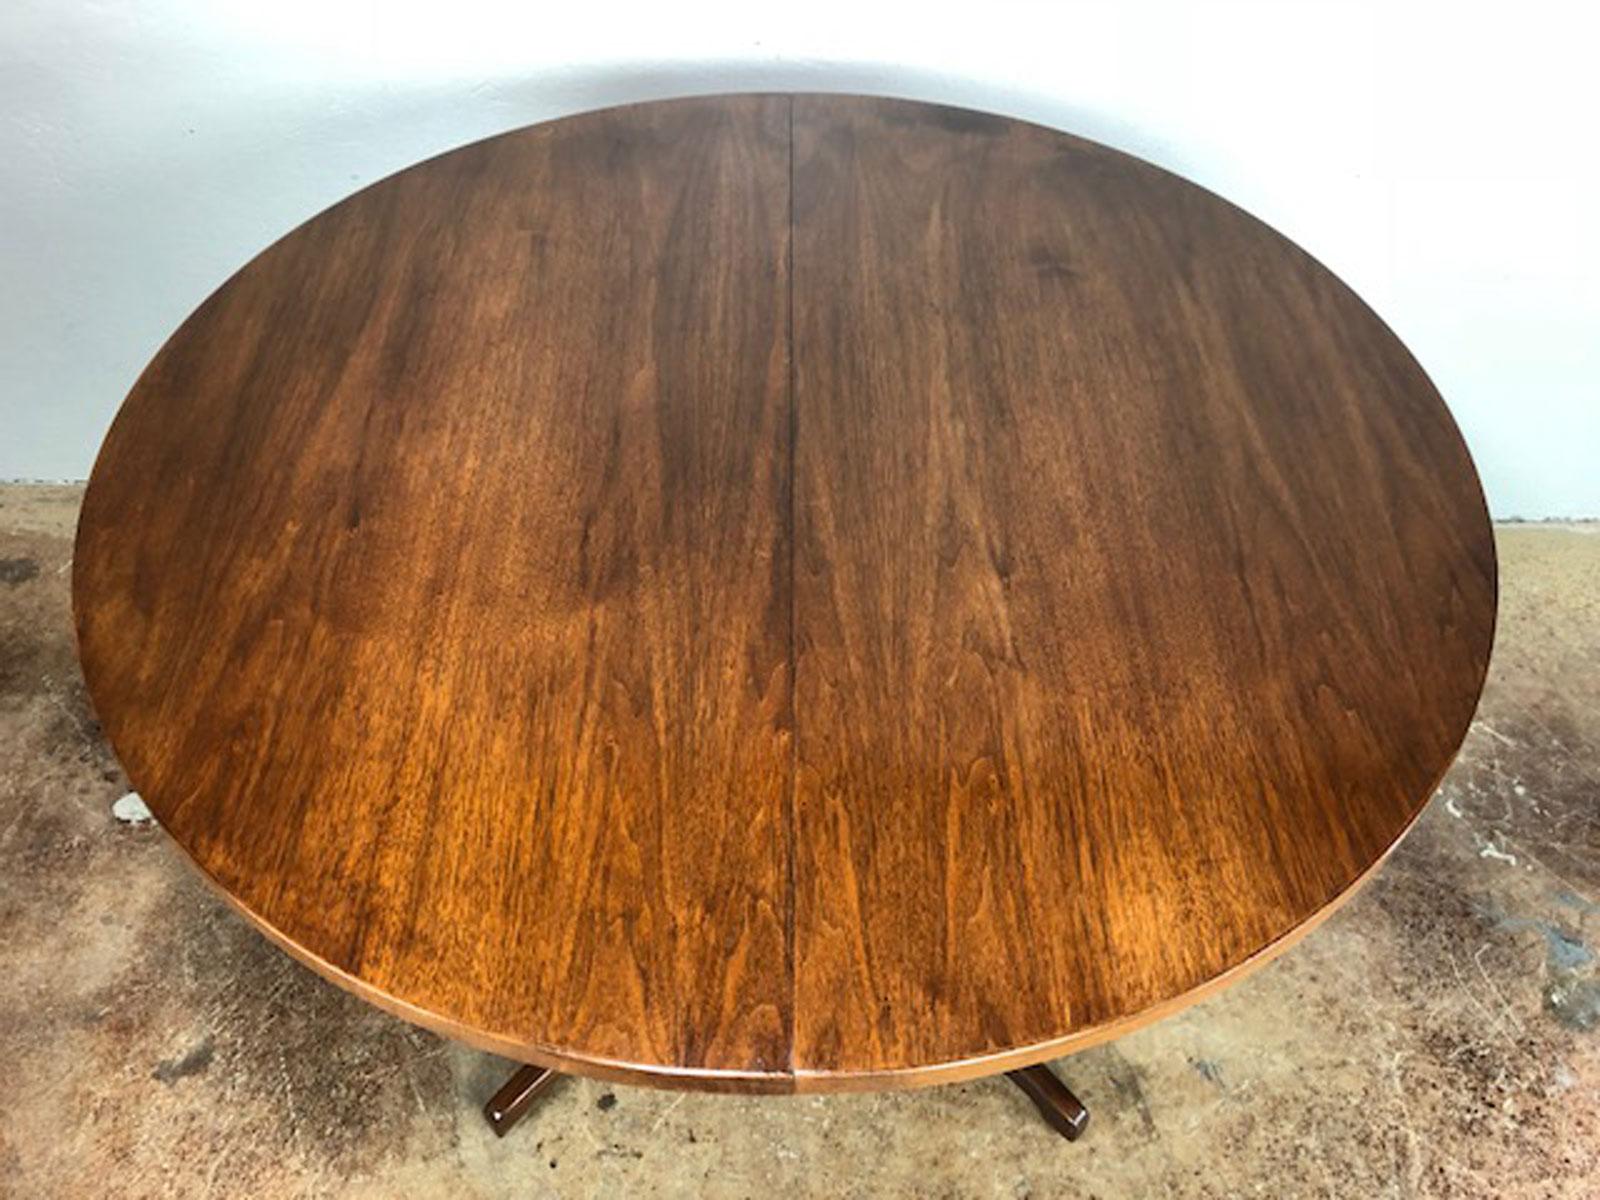 Danish dining table in walnut. Unknown maker. Very nice condition, circa 1960s.